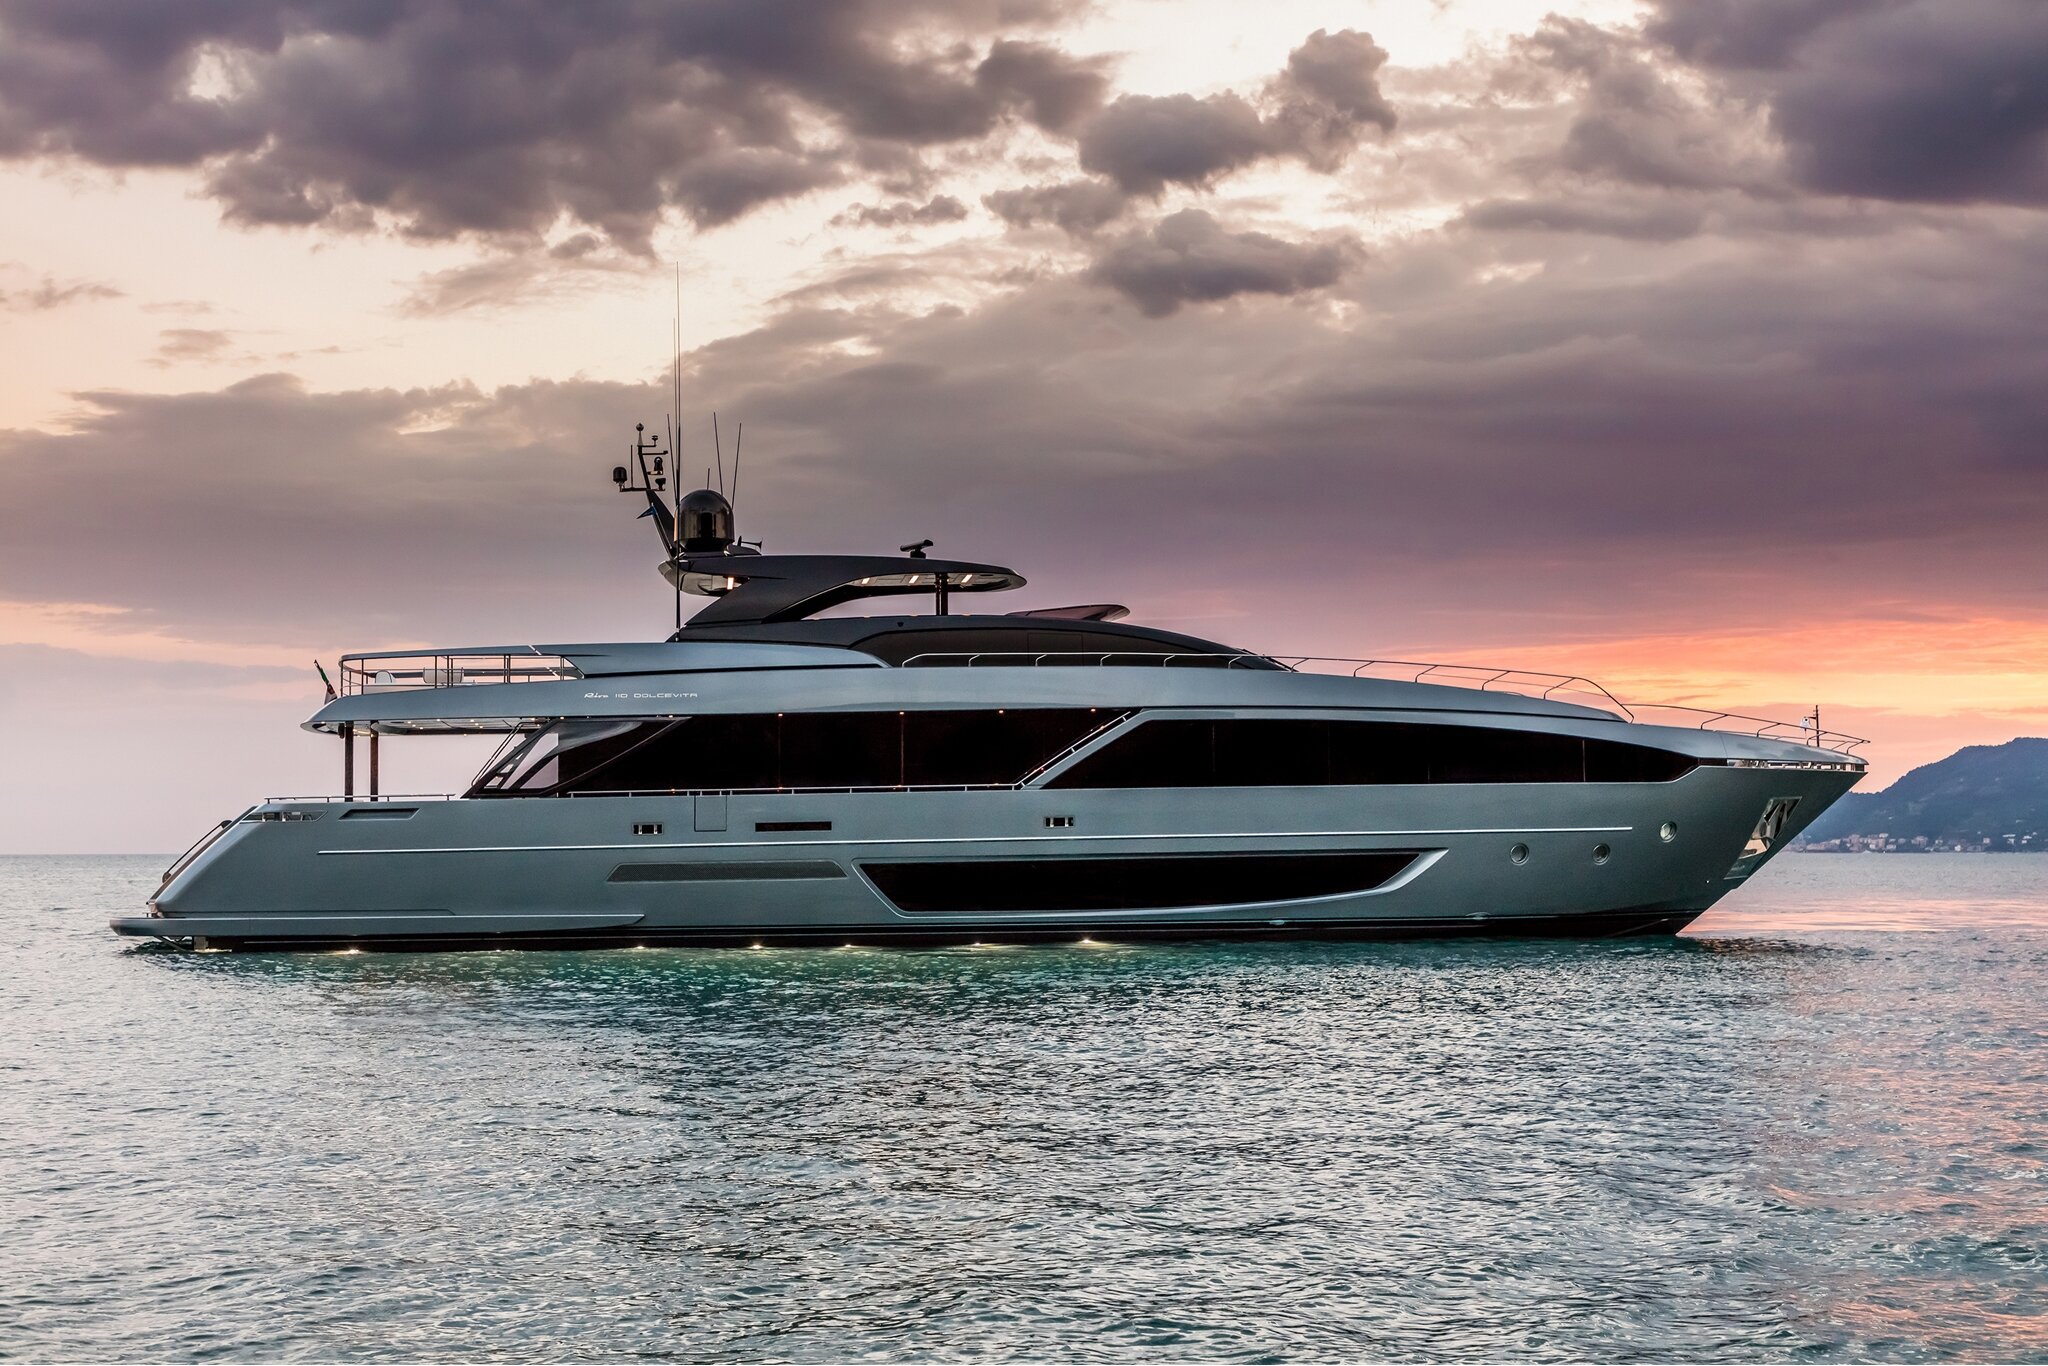 Riva 110 Dolcevita For Sale Price Availability Information Chris Coughlin Yacht Sales Executive Allied Marine